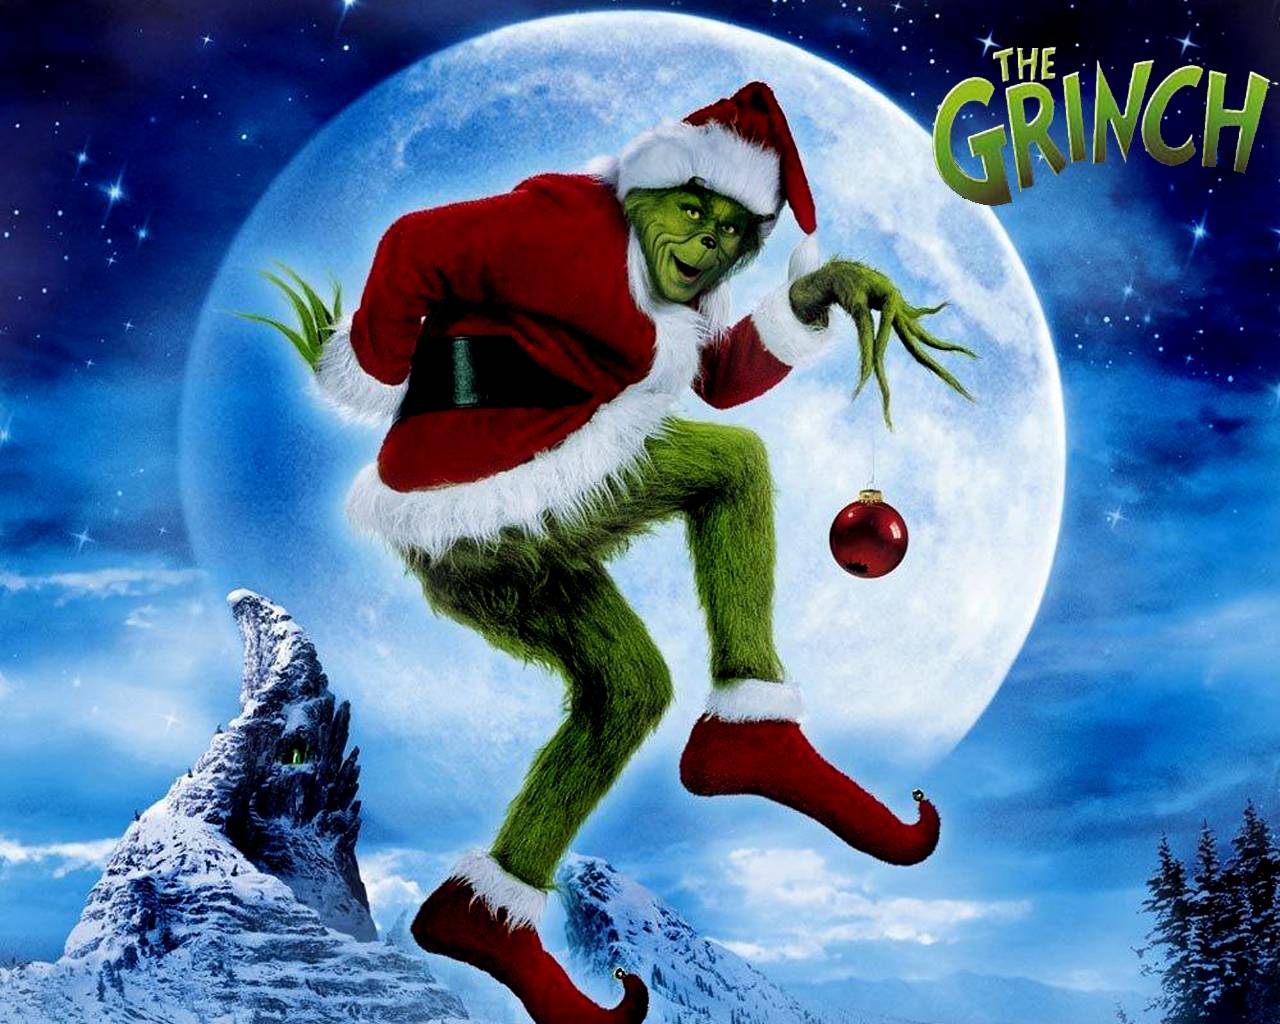 How the Grinch Stole Christmas Wallpaper. Christmas Wallpaper, Beautiful Christmas Wallpaper and Awesome Christmas Wallpaper